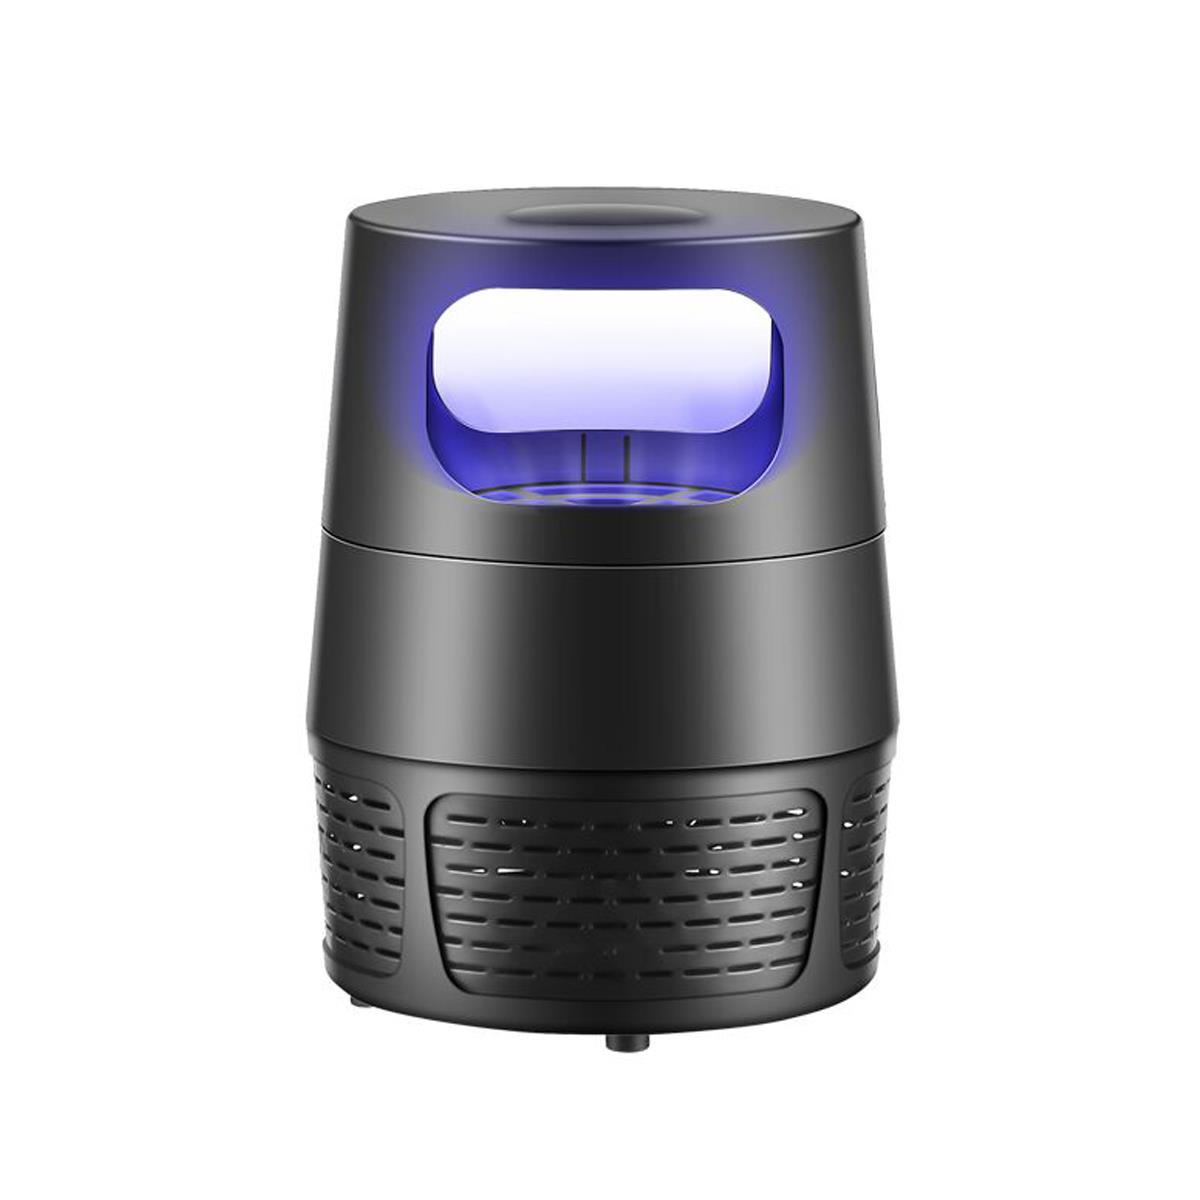 5V-USB-LED-Mosquito-Killer-Lamp-Insect-Fly-Bug-Zapper-Trap-Pest-Control-UV-Light-Mosquito-Dispeller-1445790-1